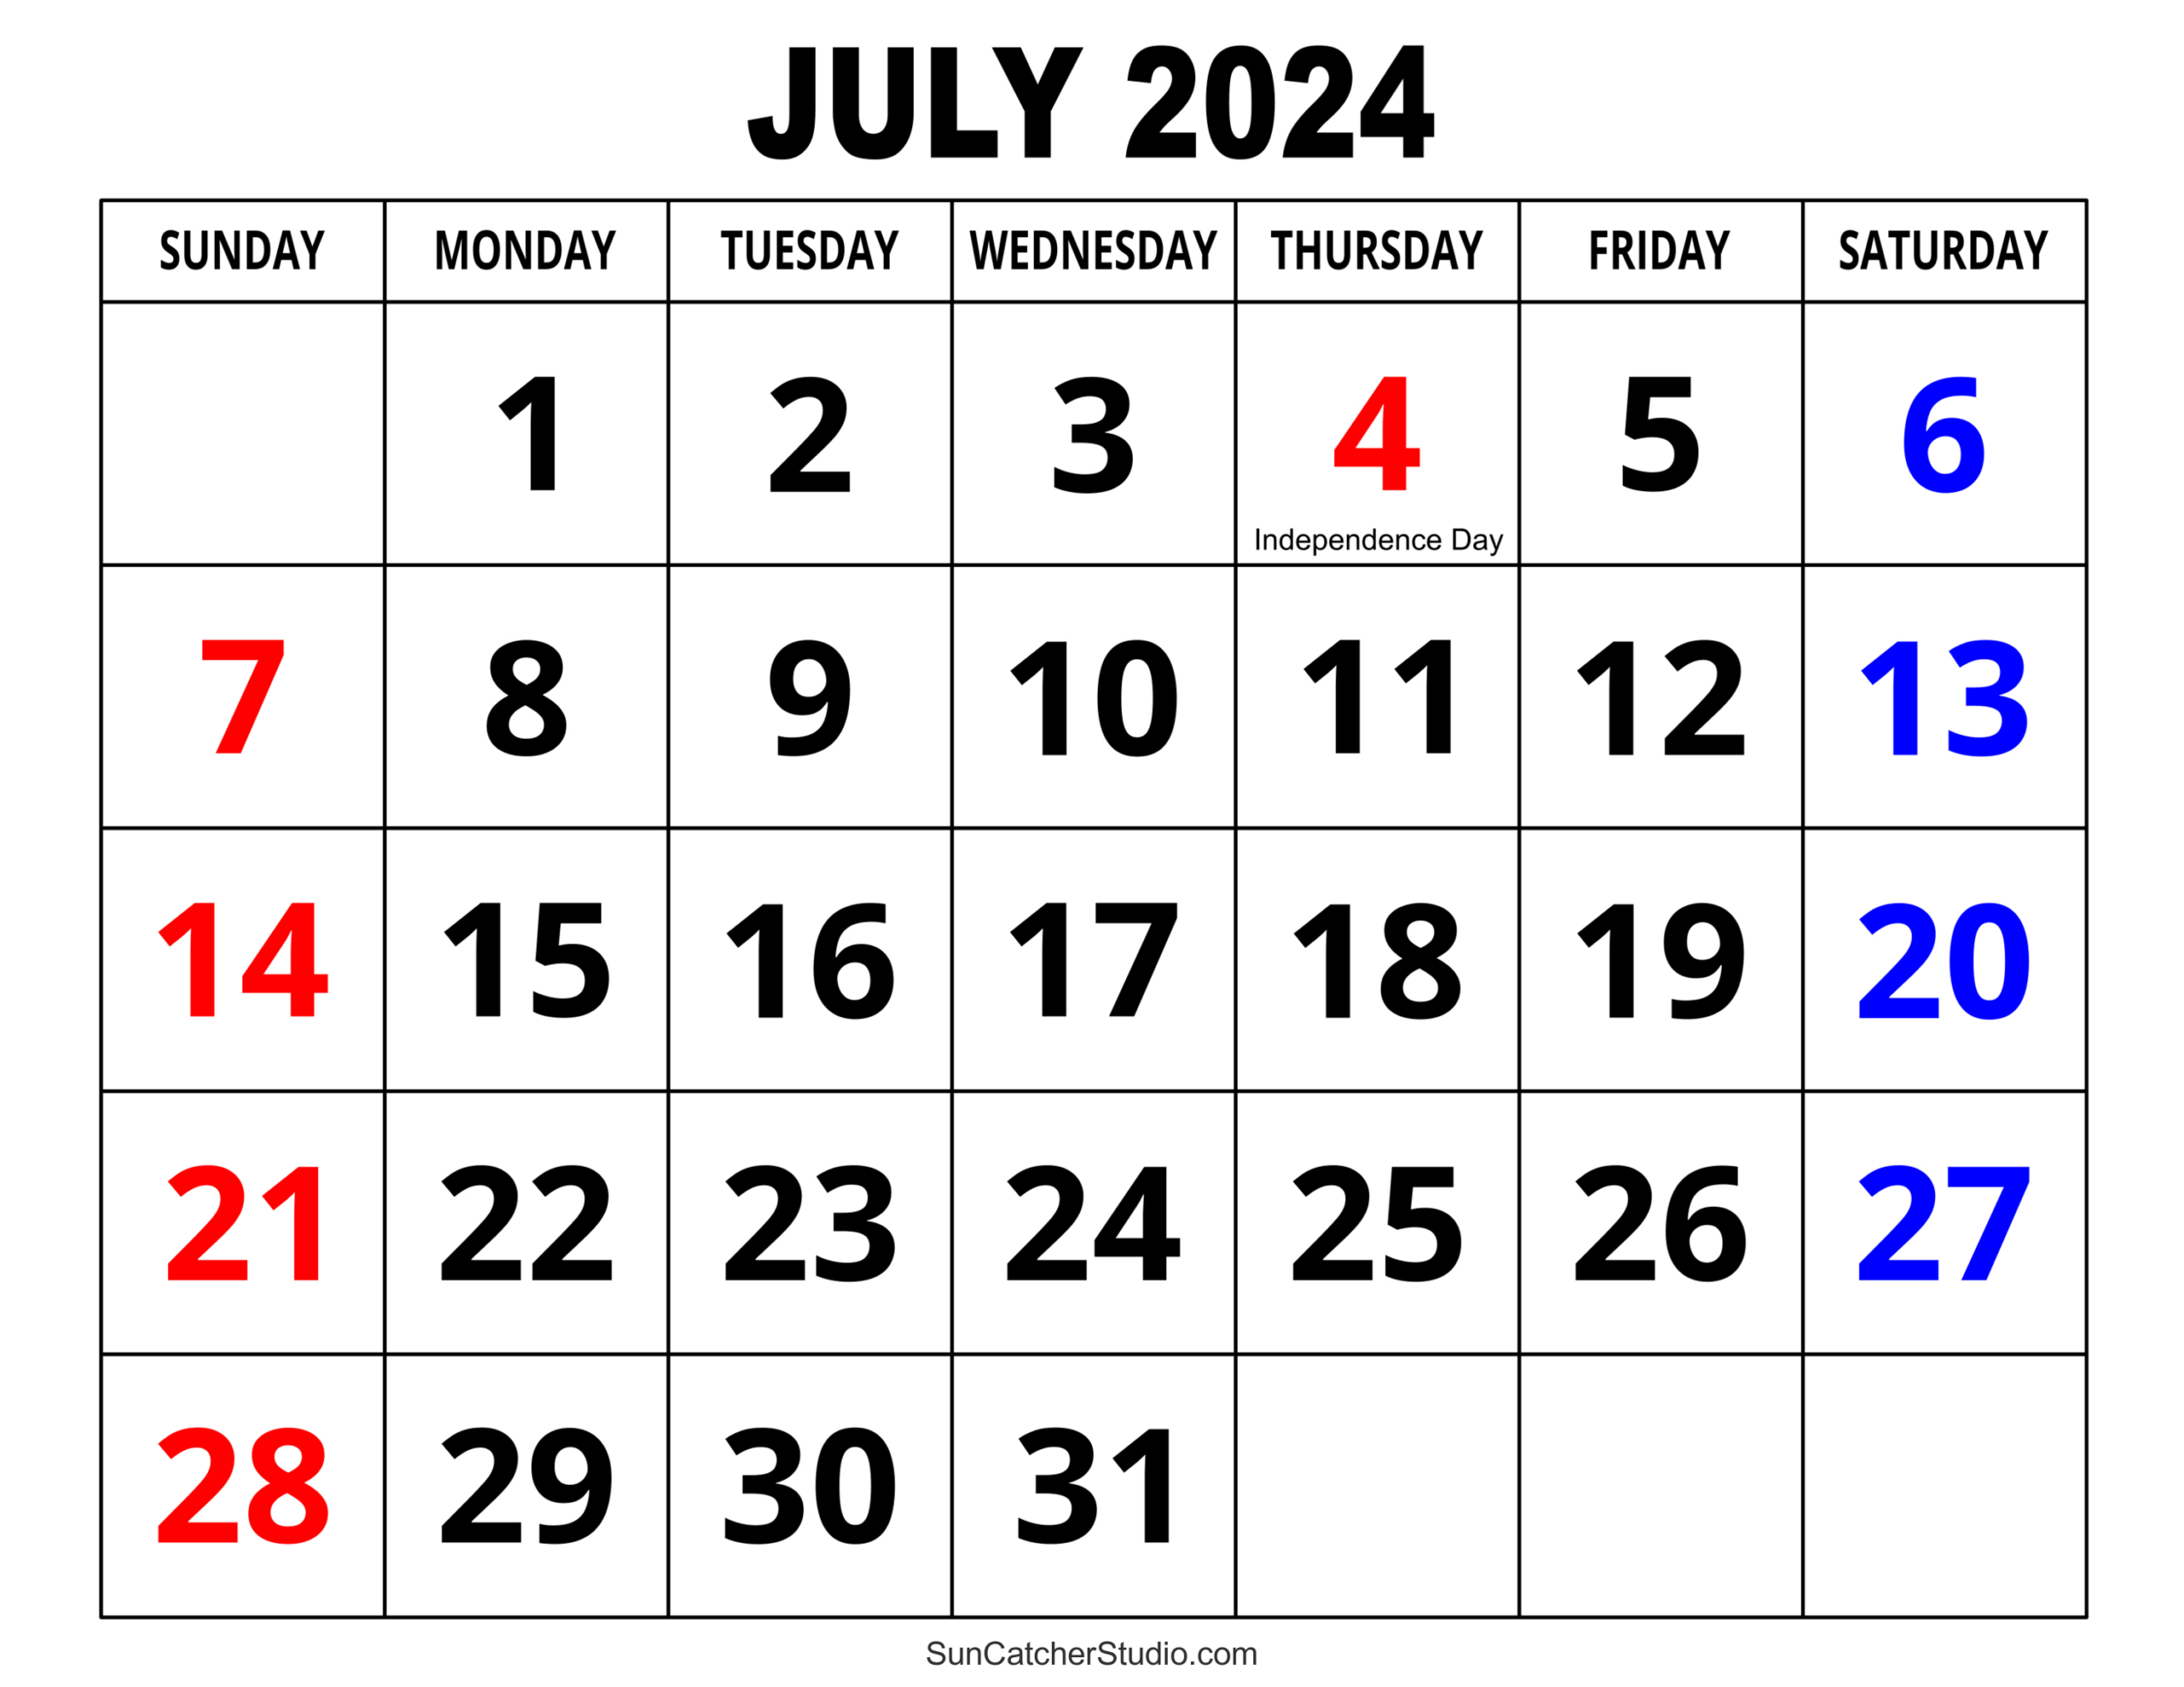 July 2024 Calendar (Free Printable) – Diy Projects, Patterns throughout 6 July 2024 Calendar Printable